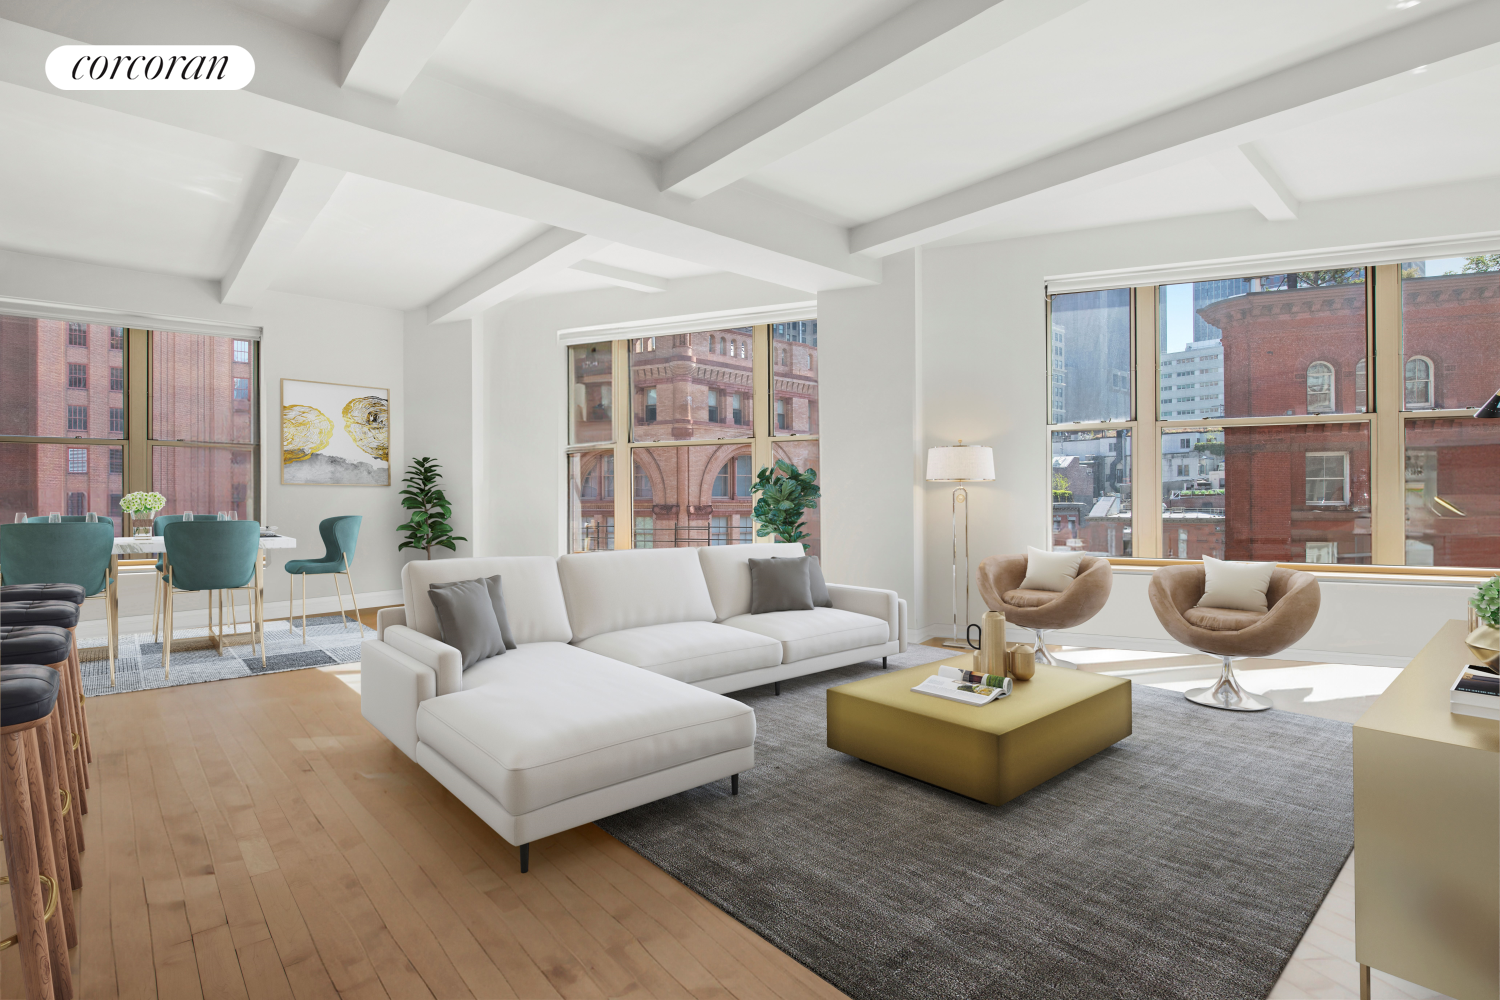 166 Duane Street 5A, Tribeca, Downtown, NYC - 3 Bedrooms  
3.5 Bathrooms  
5 Rooms - 